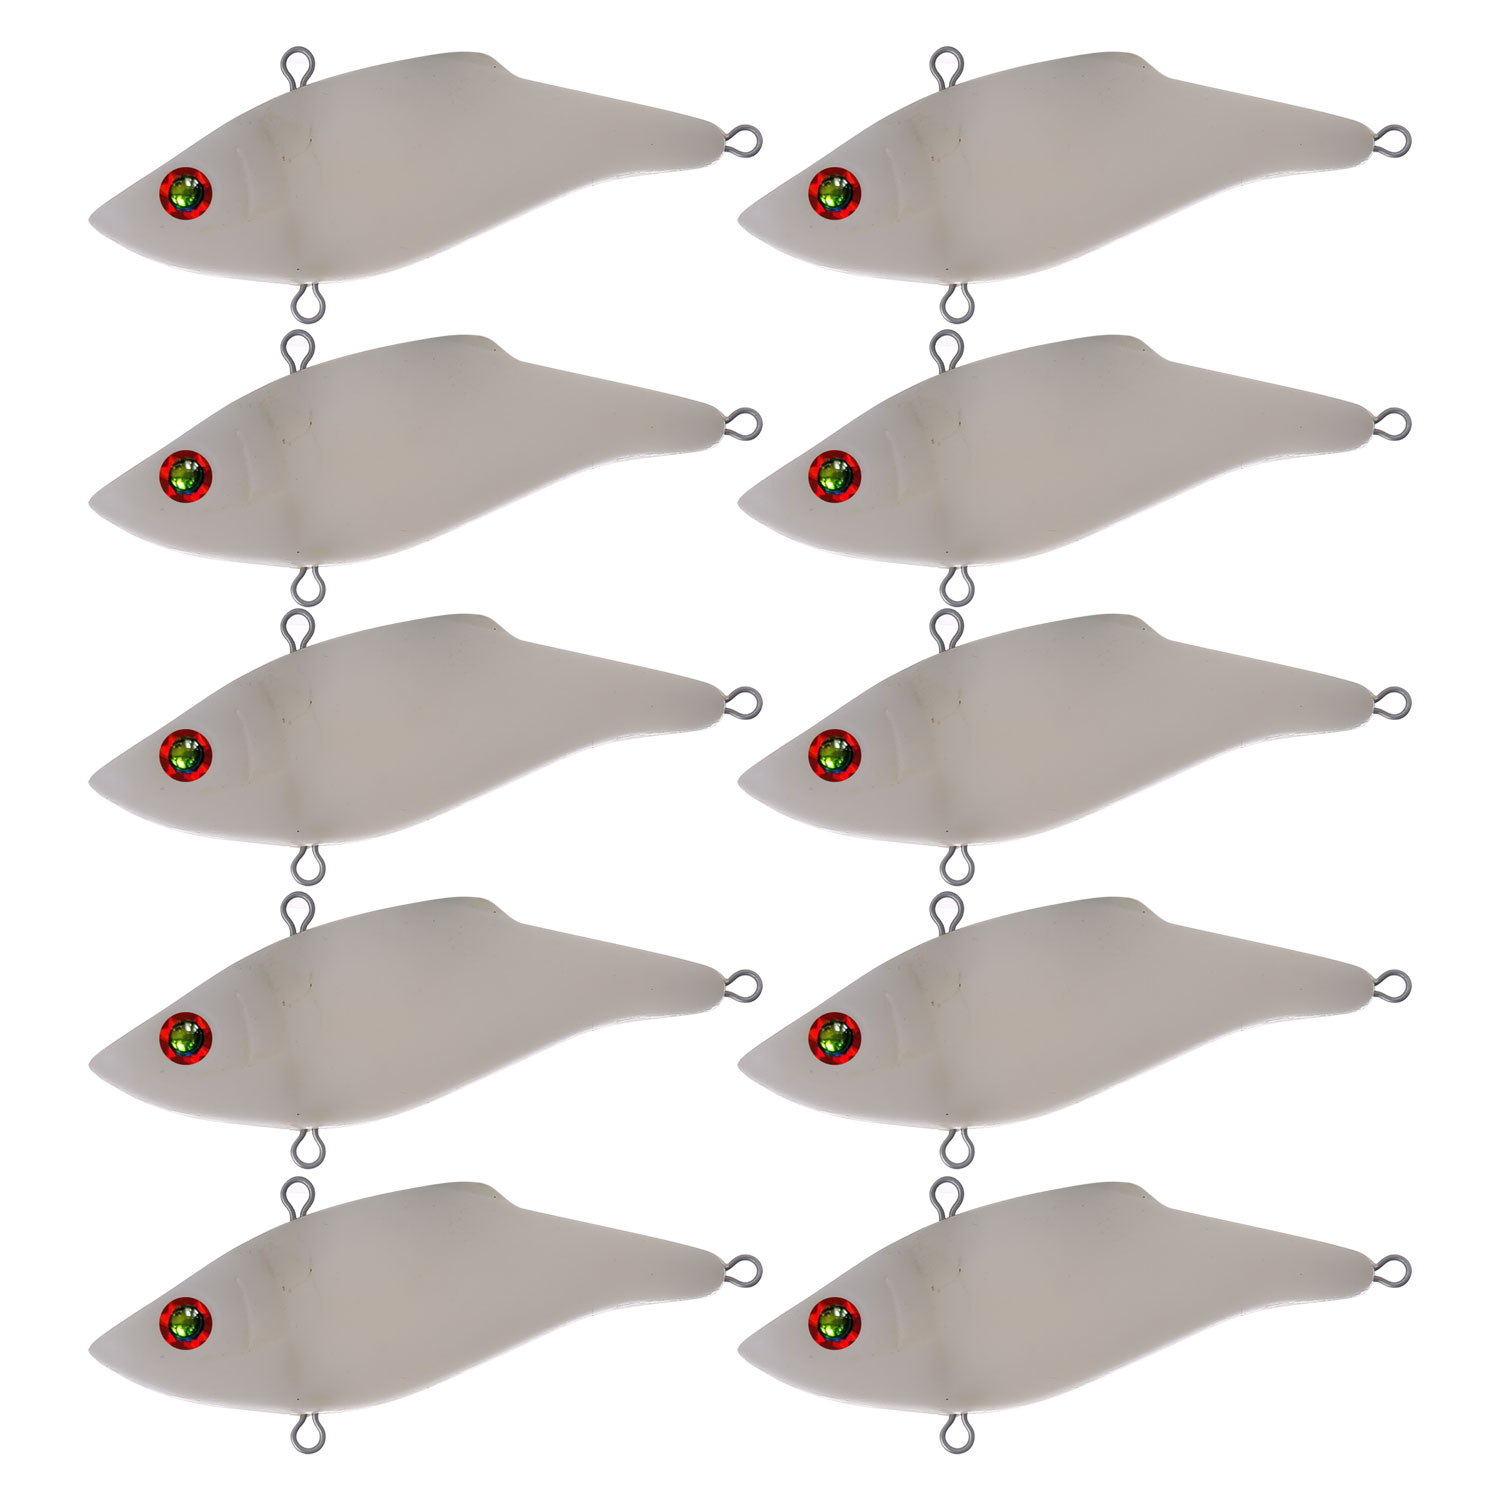 Wholesale Blank Unpainted Lipless Fishing Lures with Free Eyes